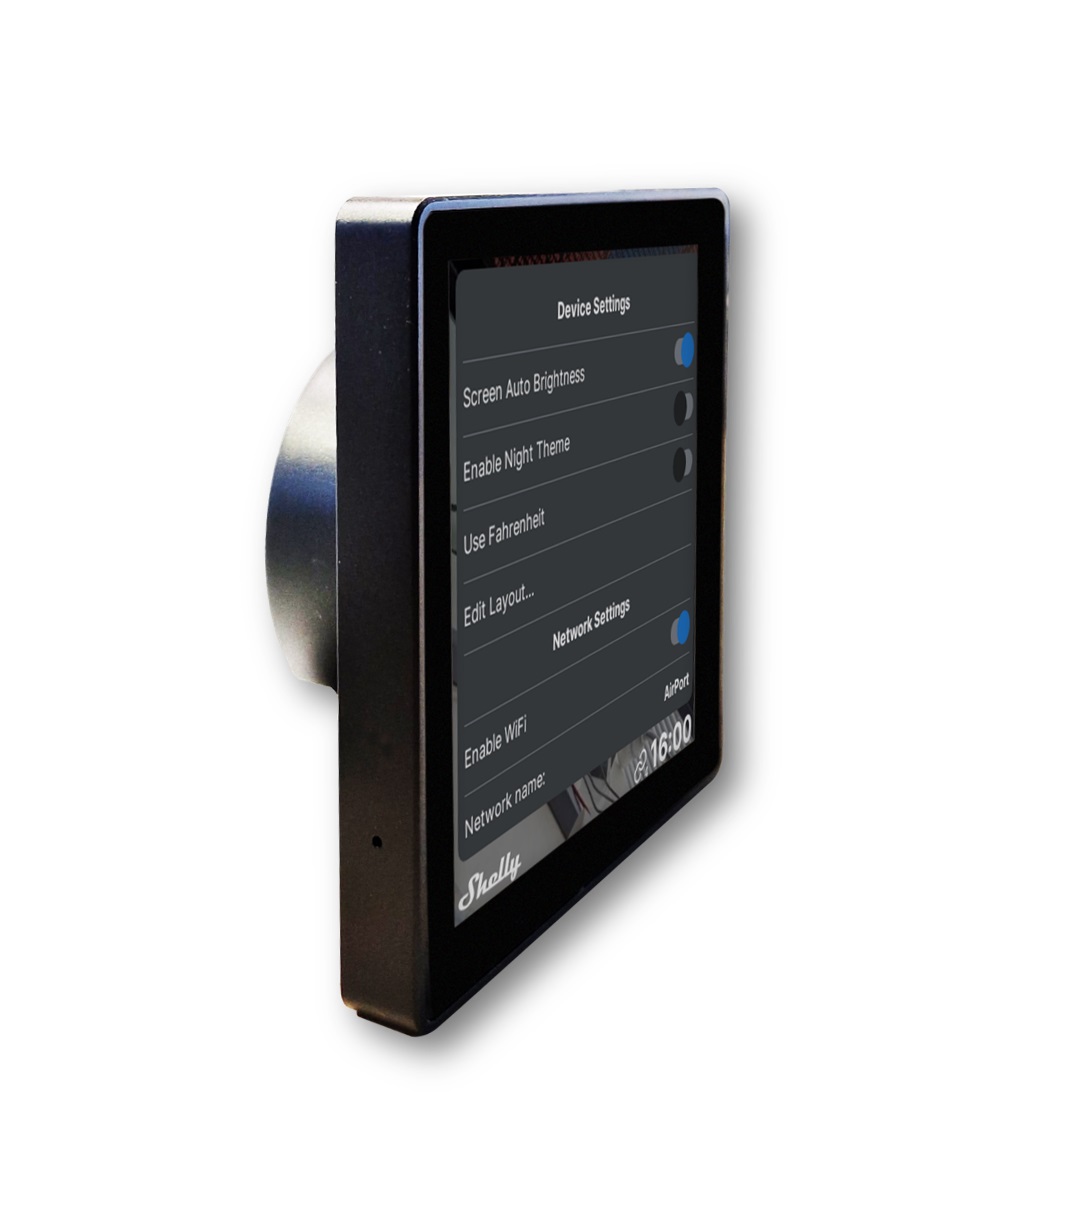 Shelly Wall Display WLAN Wand - Touchdisplay mit Android, Farbe: weiß